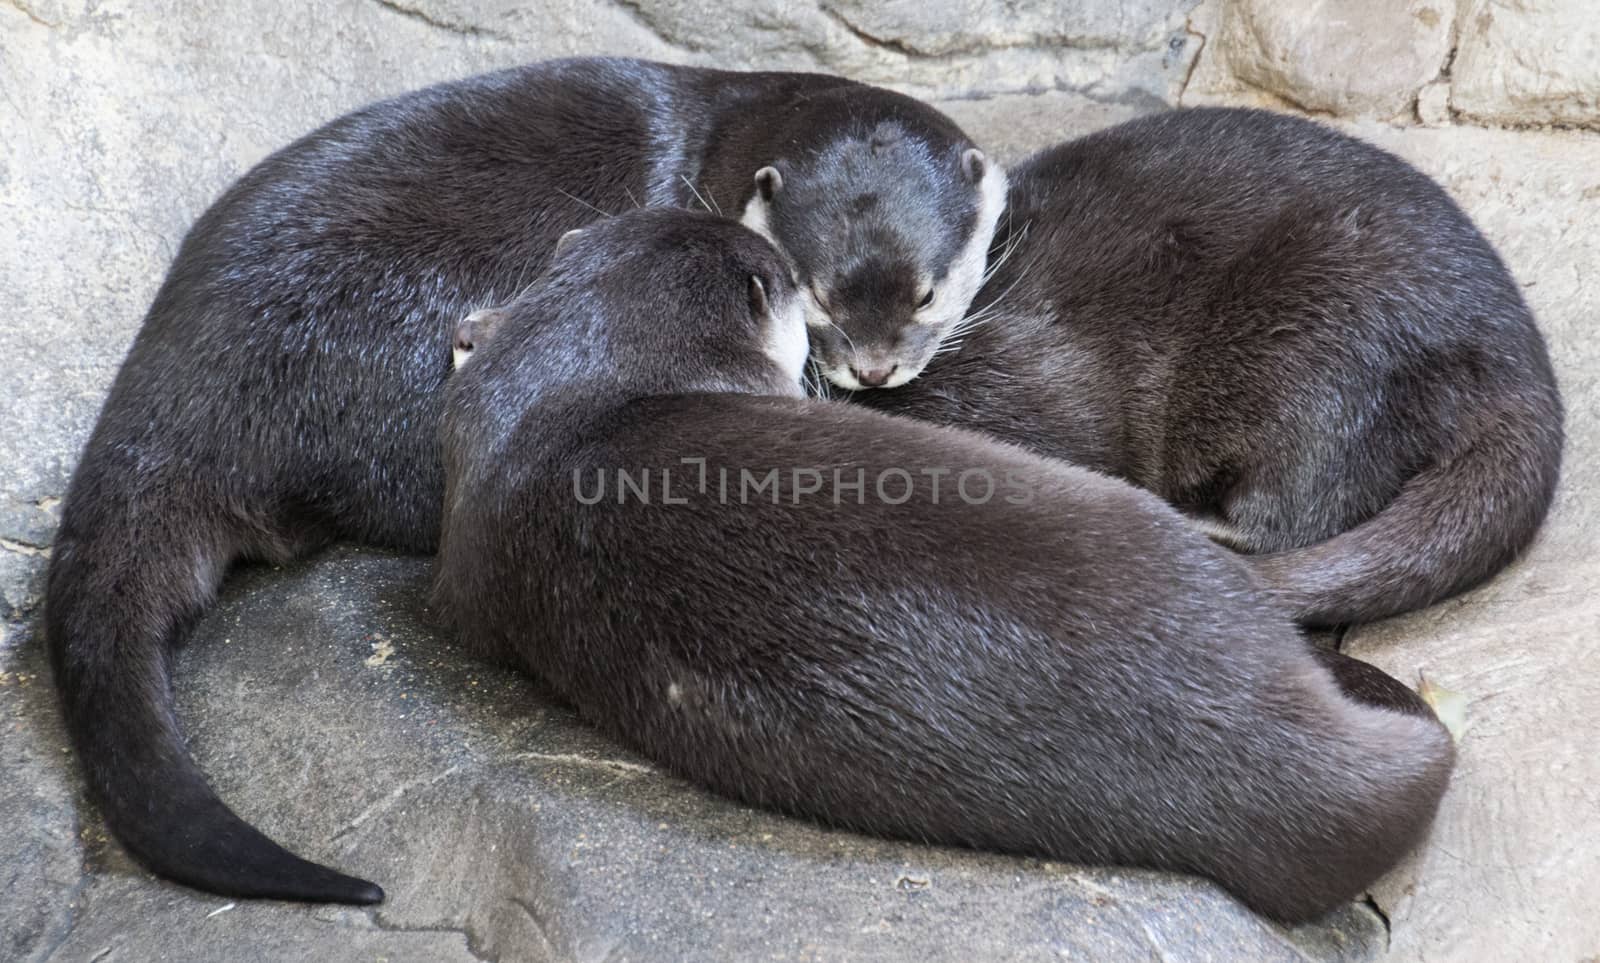 Otters napping by bkenney5@gmail.com